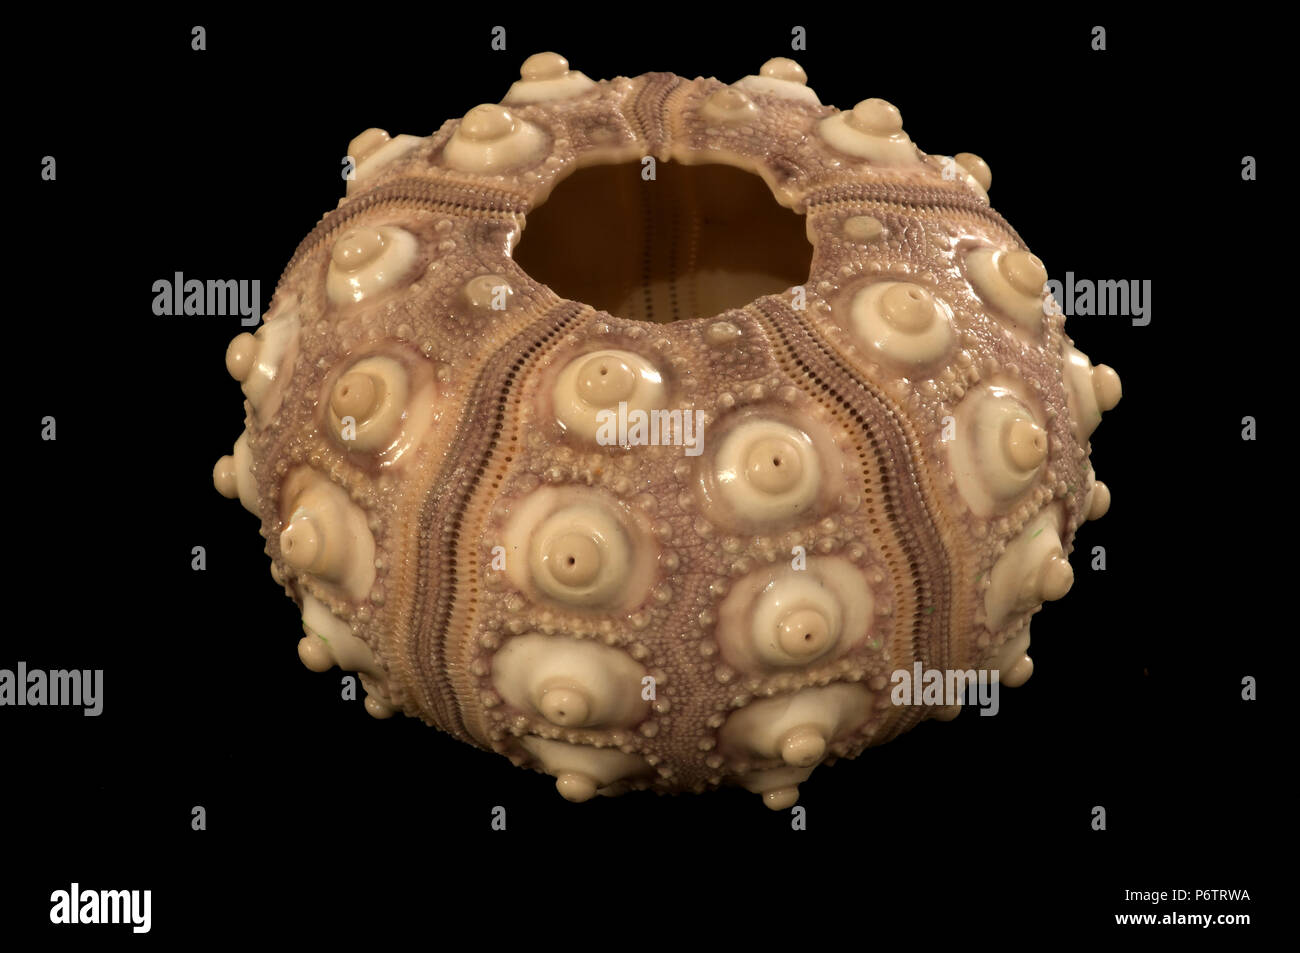 Calcareous skeleton of sea urchin Phyllacanthus imperialis Stock Photo